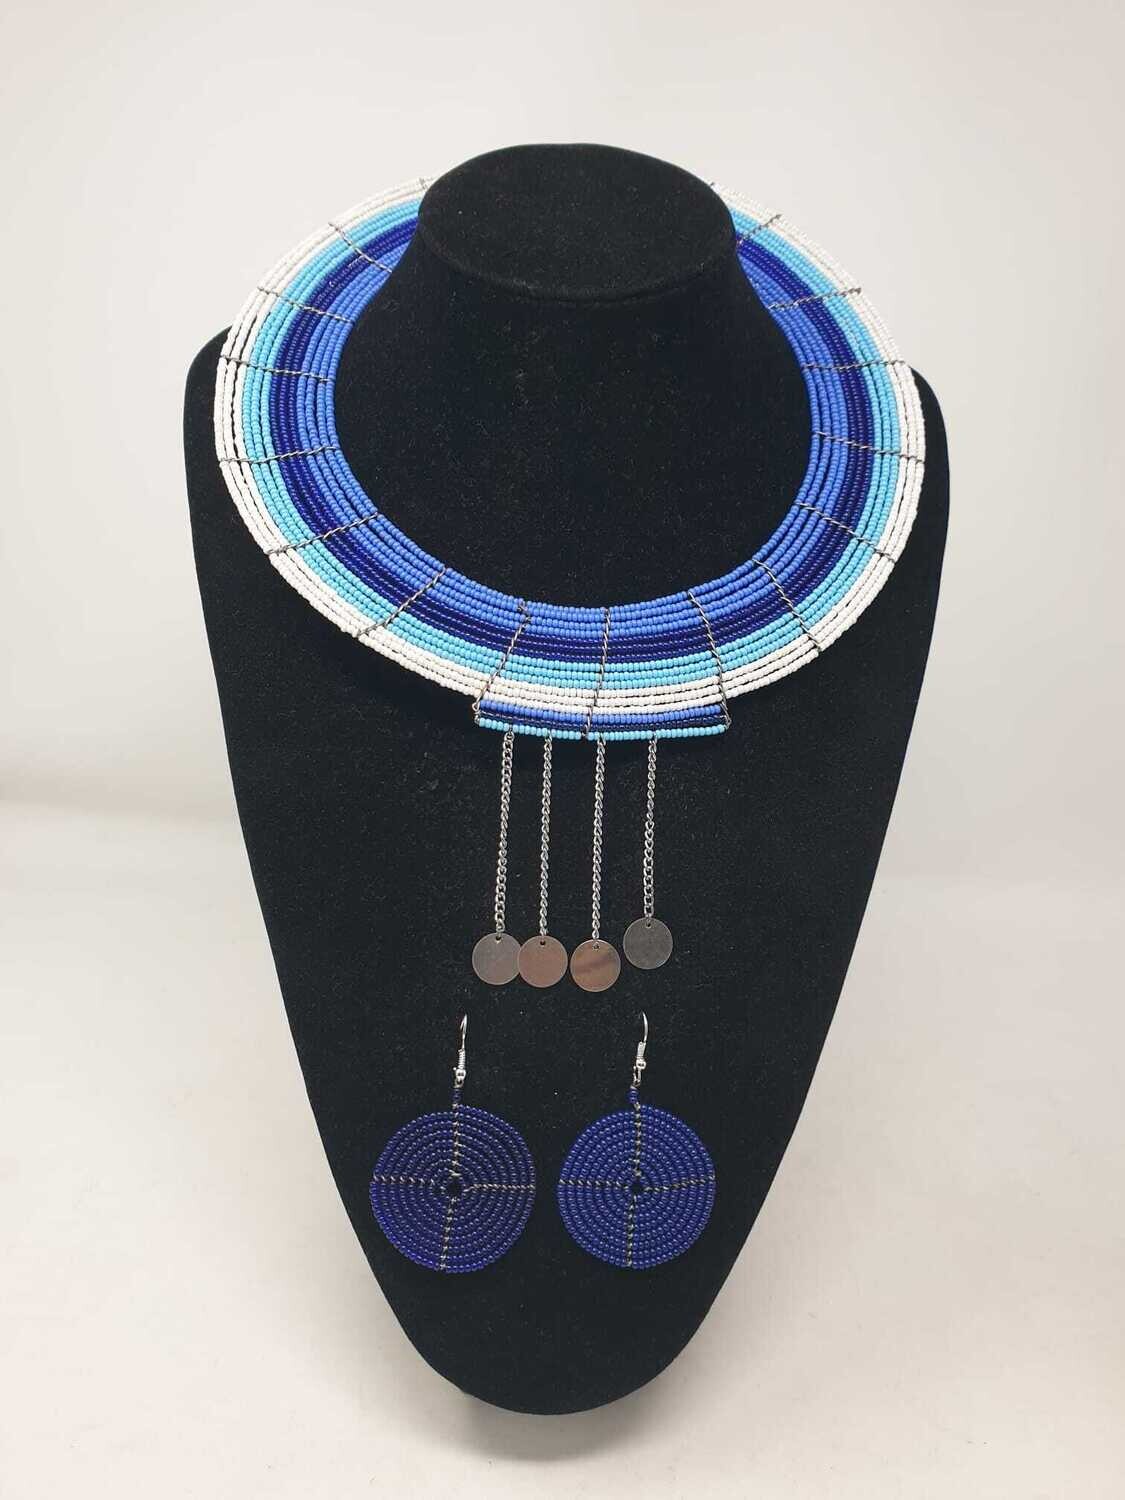 Masai Beaded Necklace with Matching Earrings - White and Blue